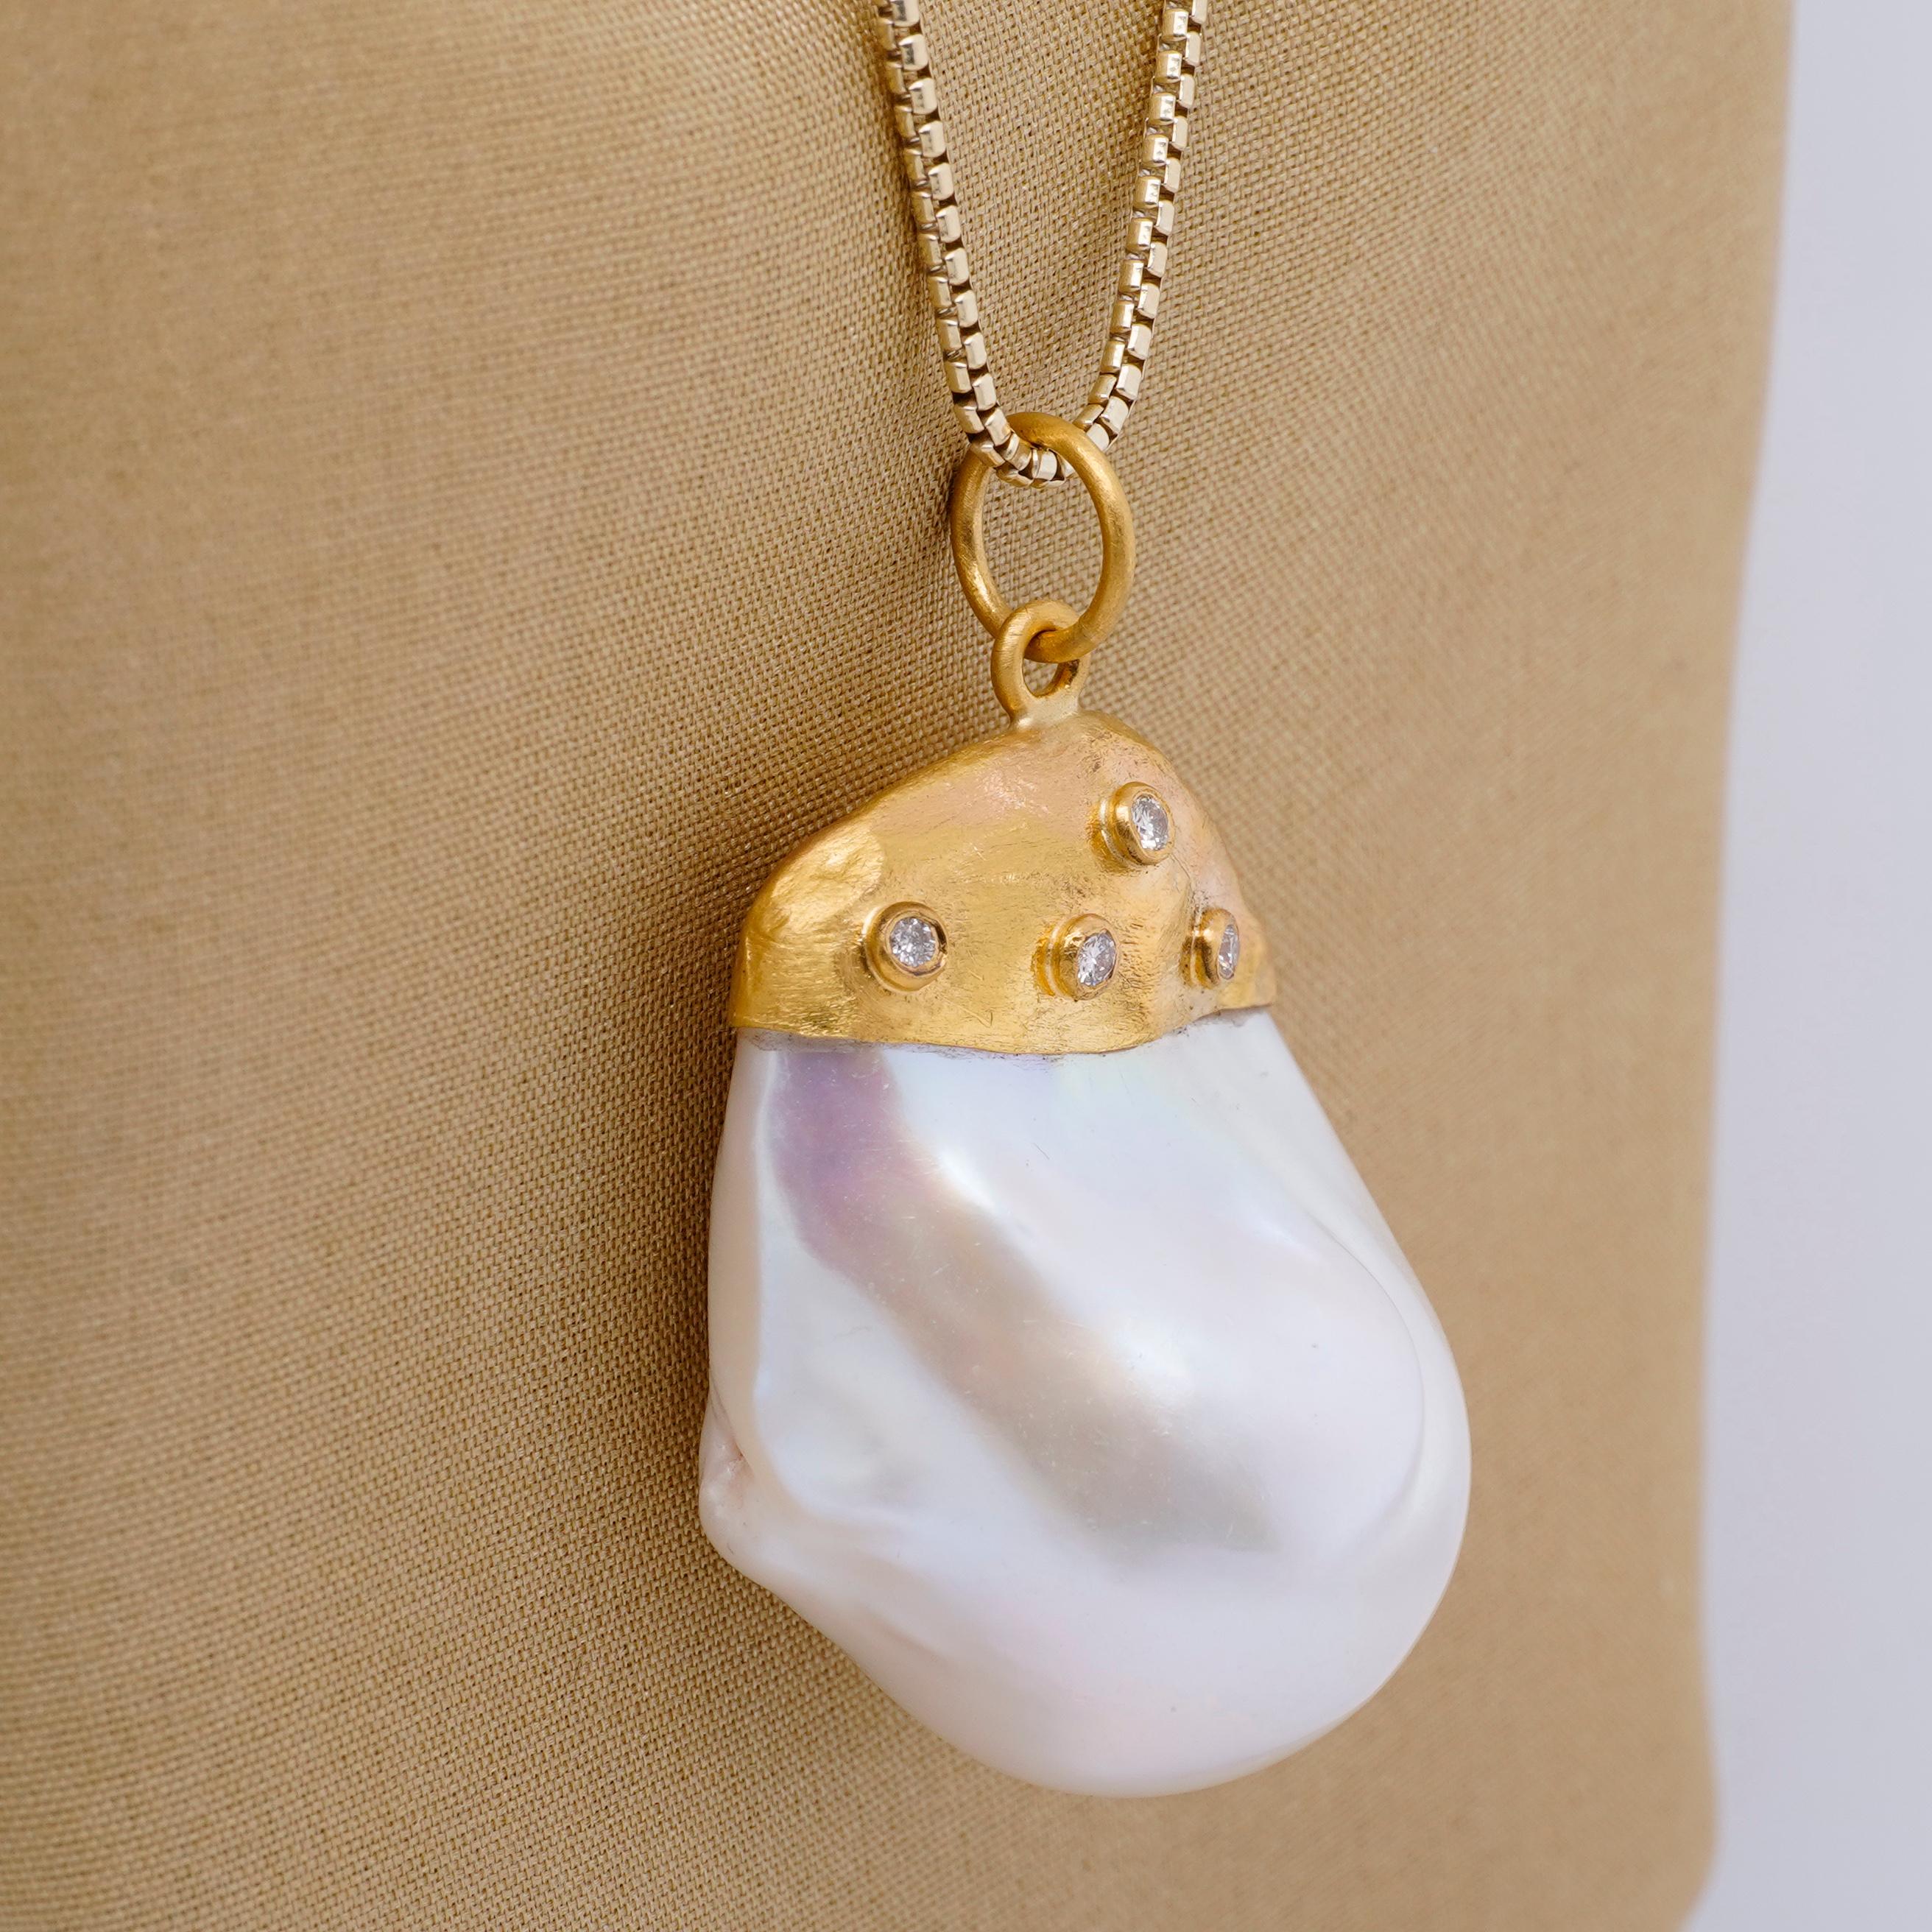 Large, 67.05ct Baroque Pearl Pendant Necklace with Diamonds, 24kt Solid Gold by Prehistoric Works of Istanbul, Turkey. Baroque Pearl - 67.05cts, Diamonds - 0.07cts. Measures: X-large, Width - 21.6mm (.8